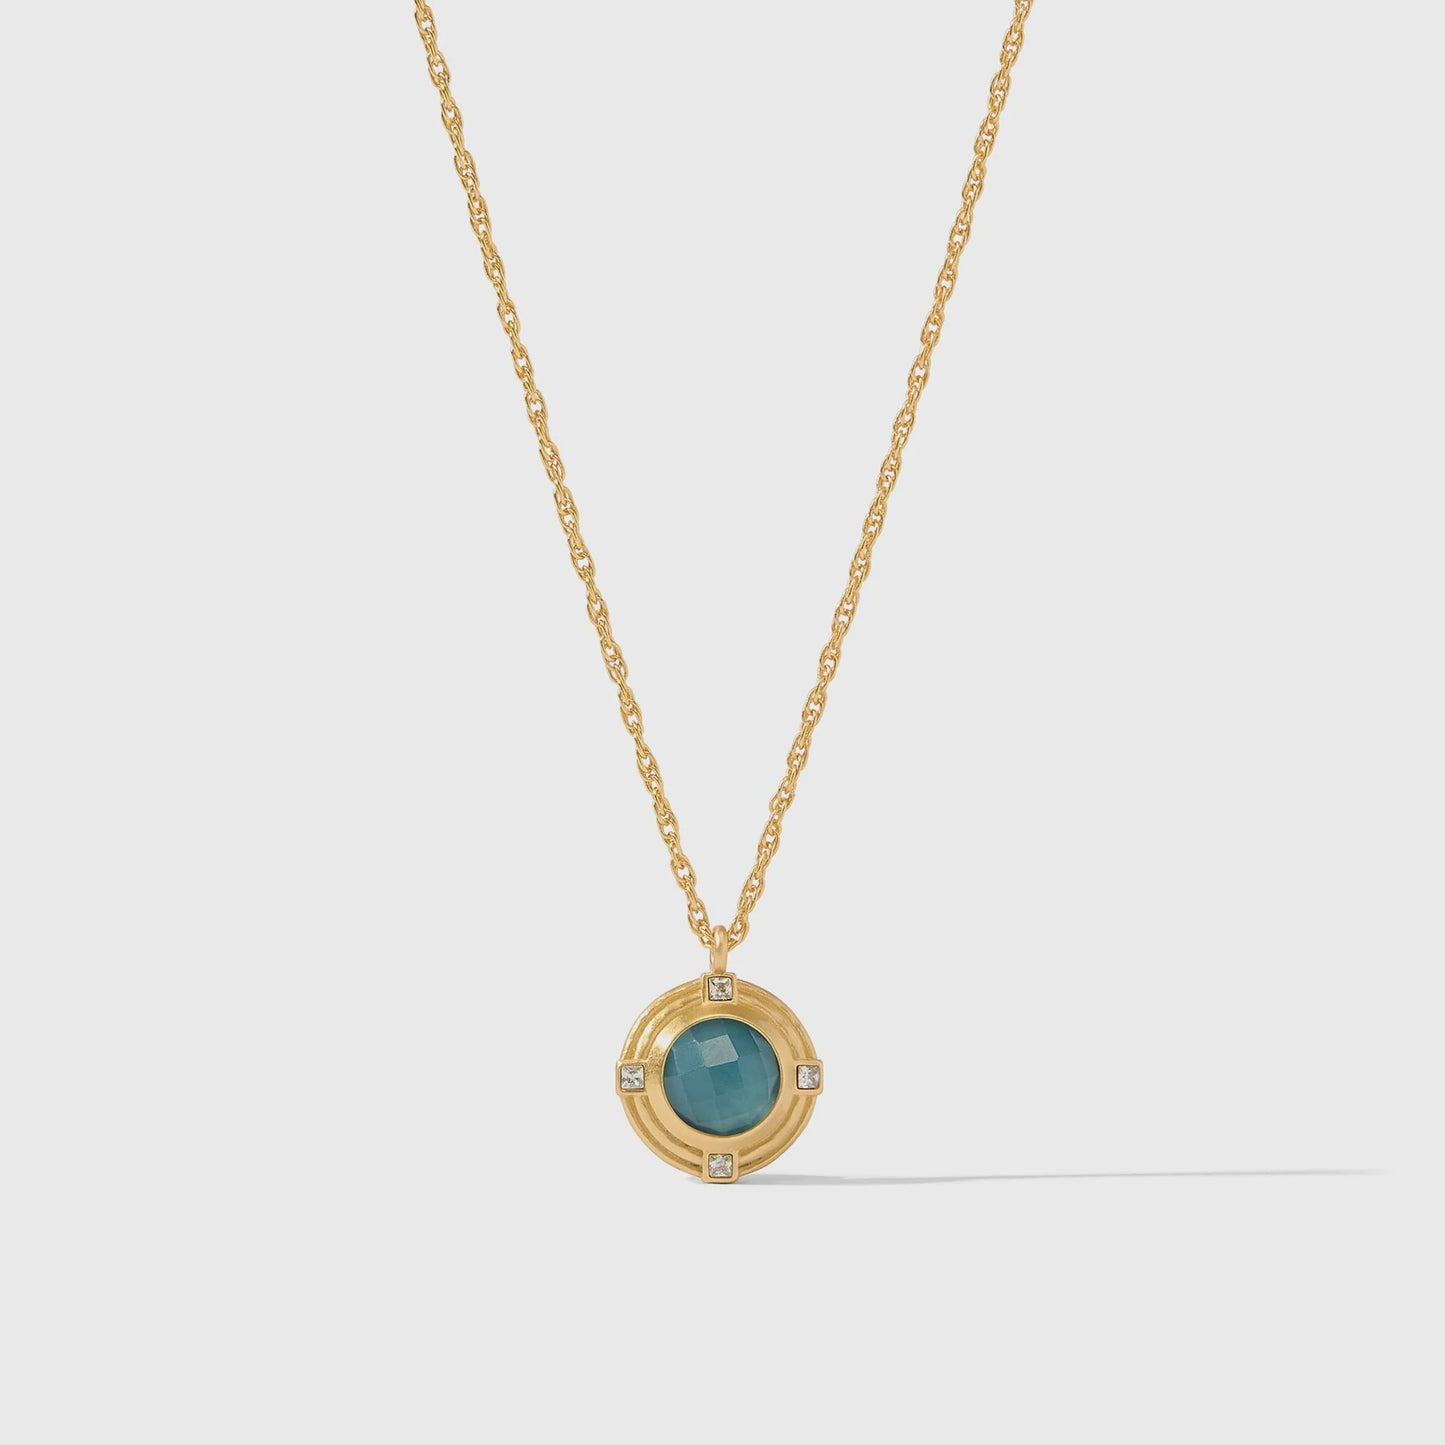 Astor Solitaire Necklacee-Iridescent Peacock Blue